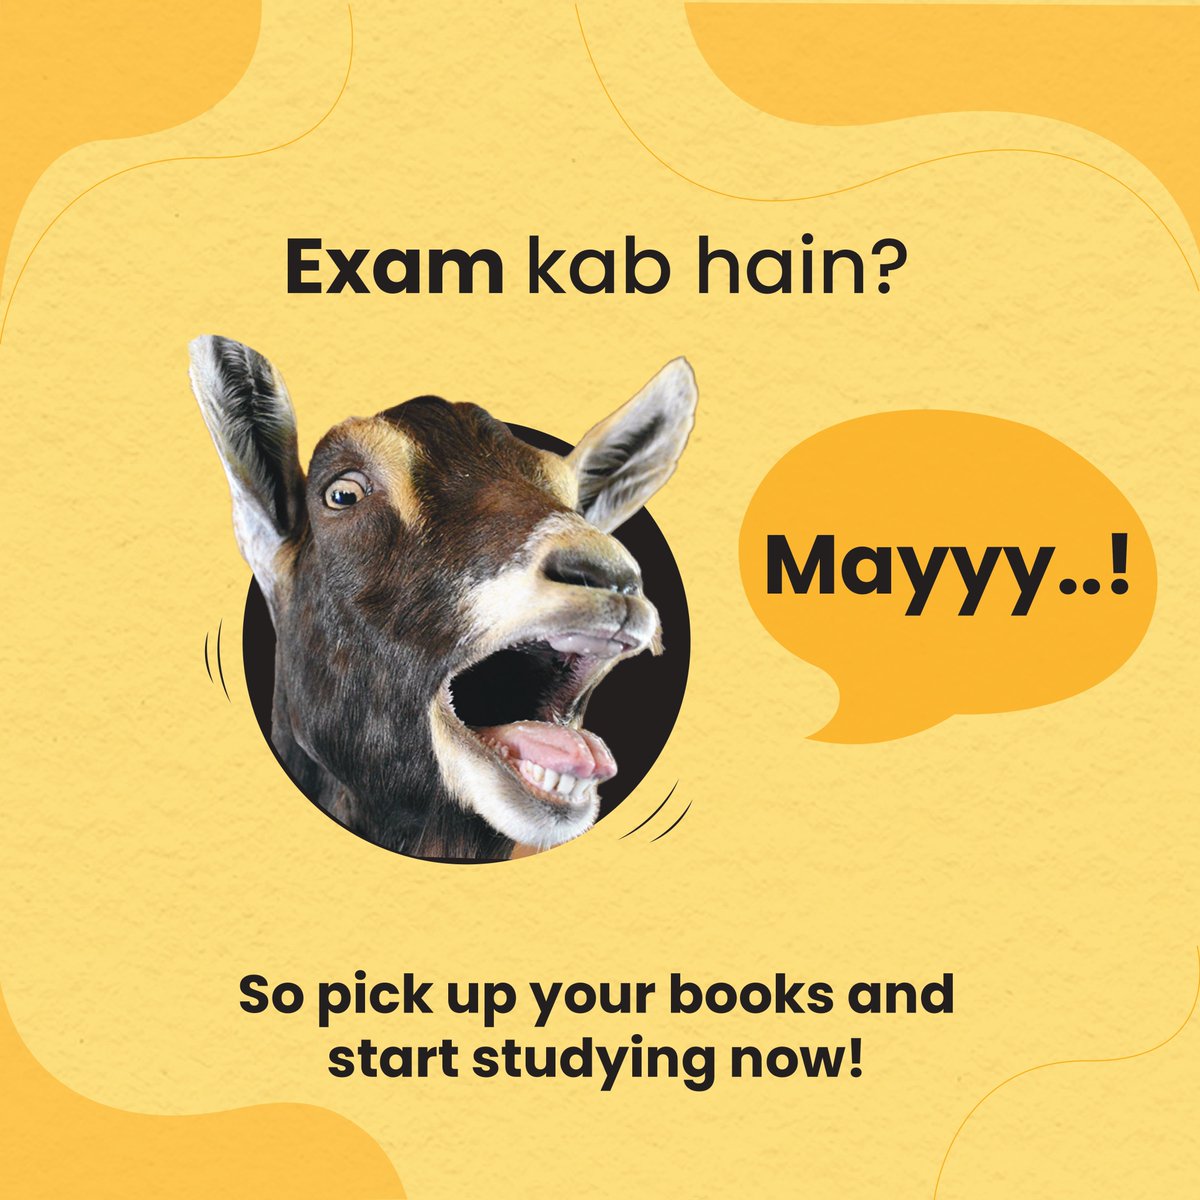 Yep, it's May...! Even the goat is aware that exam season is here. With your exams just around the corner, we're here to send you our heartfelt wishes for success.

It's time to hit the books and ace those exams like the G.O.A.T.
.
.
#TMU #TMUMBD  #exam #examtime #examtimememe